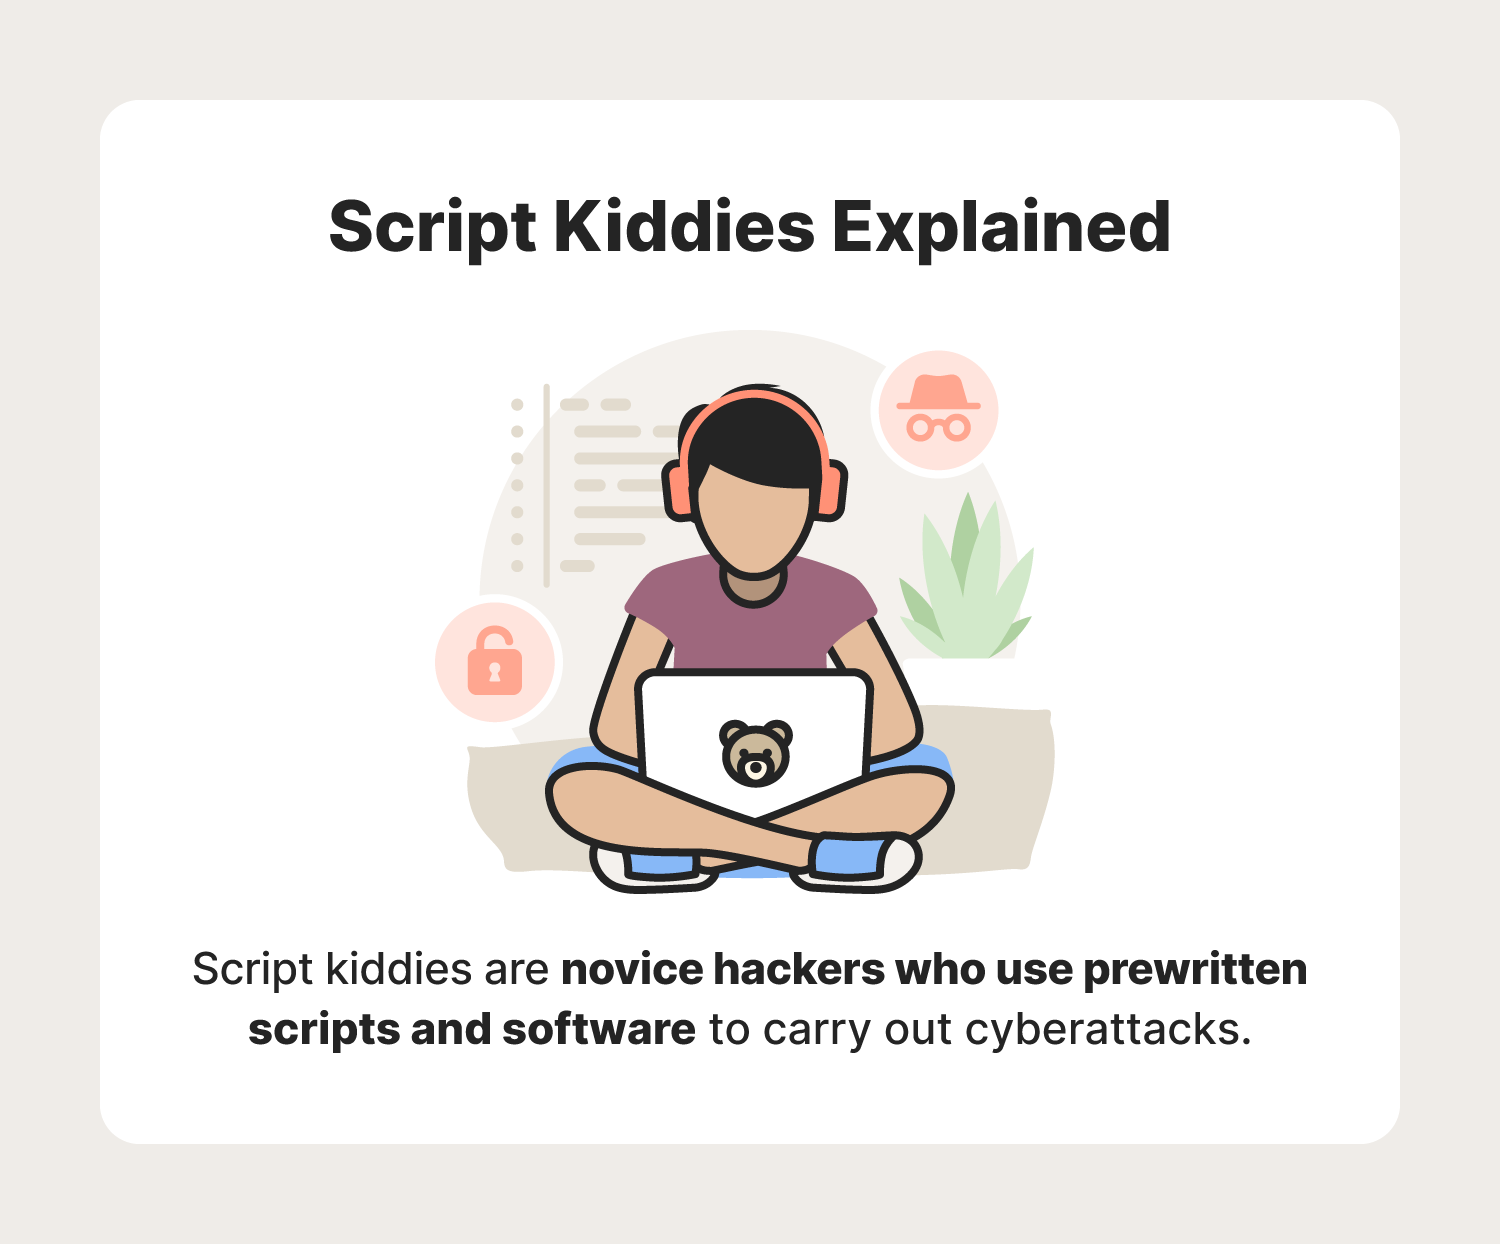 A graphic defines what a script kiddie is.